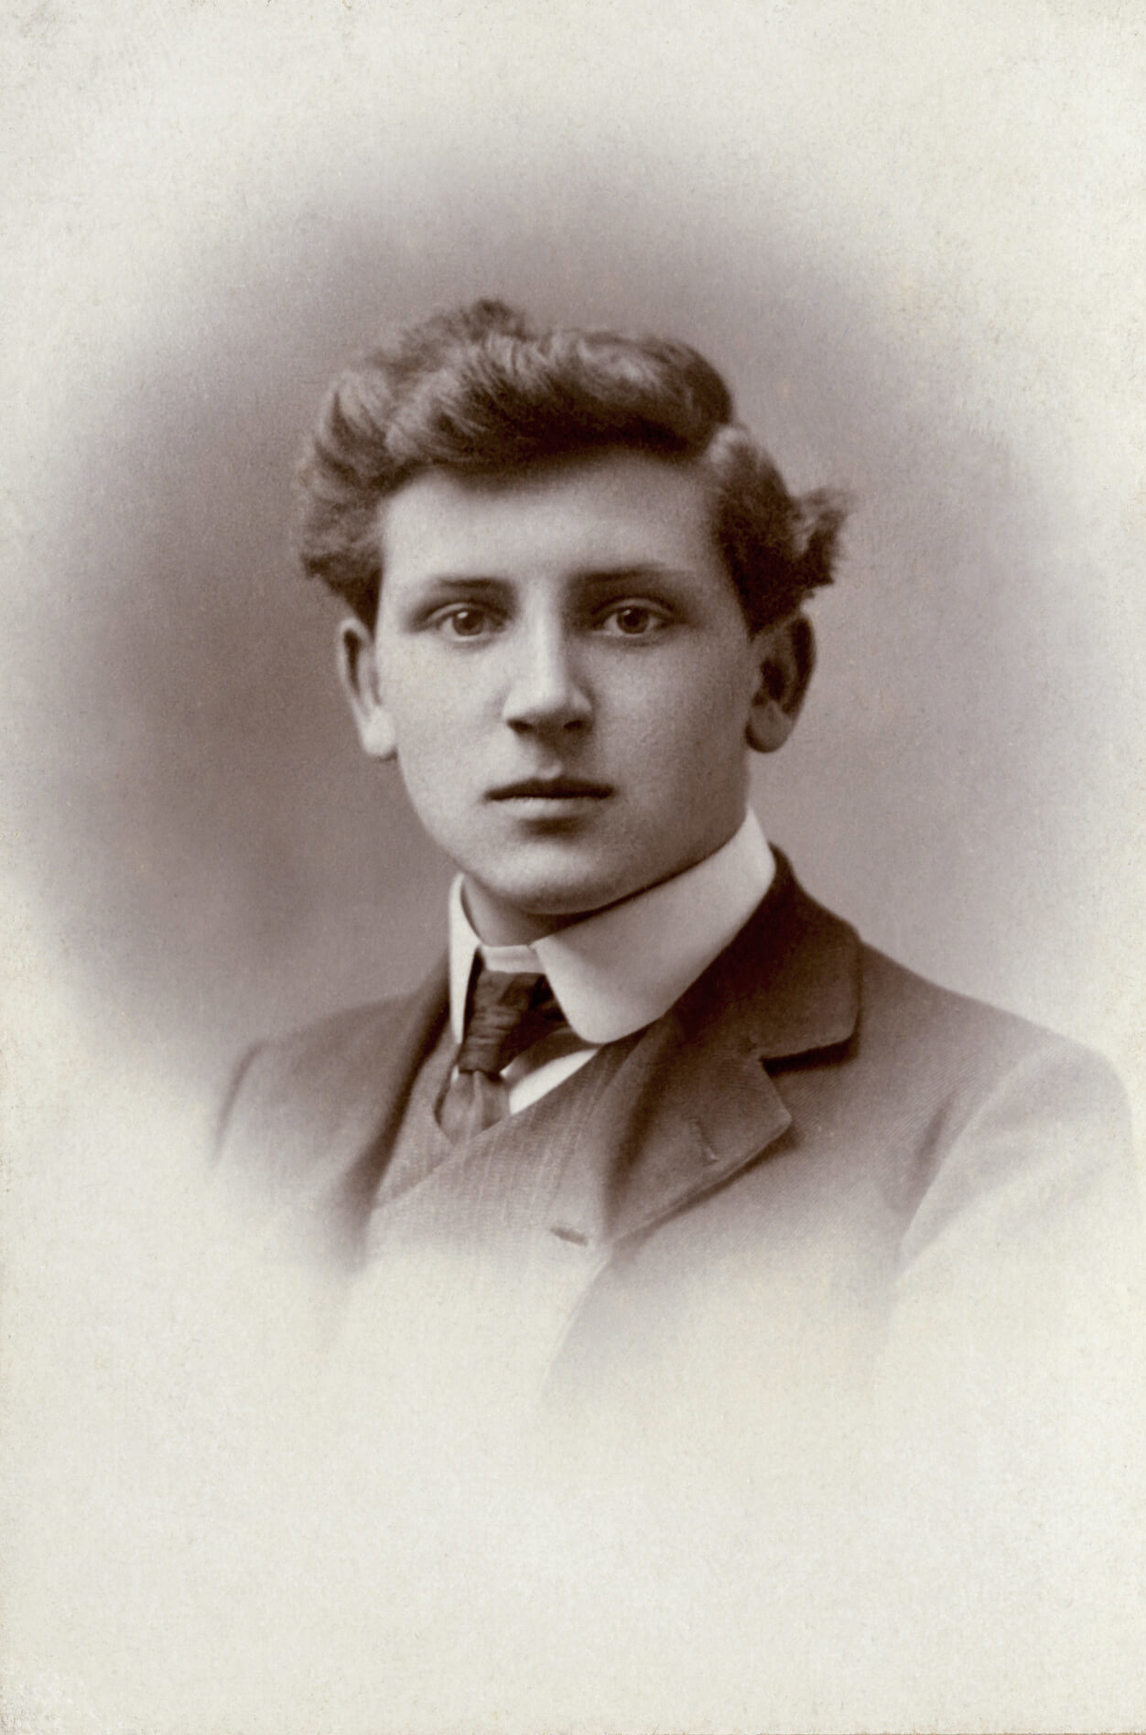 Photograph of Bertram Brooker taken in England just prior to his family’s departure for Canada in 1905